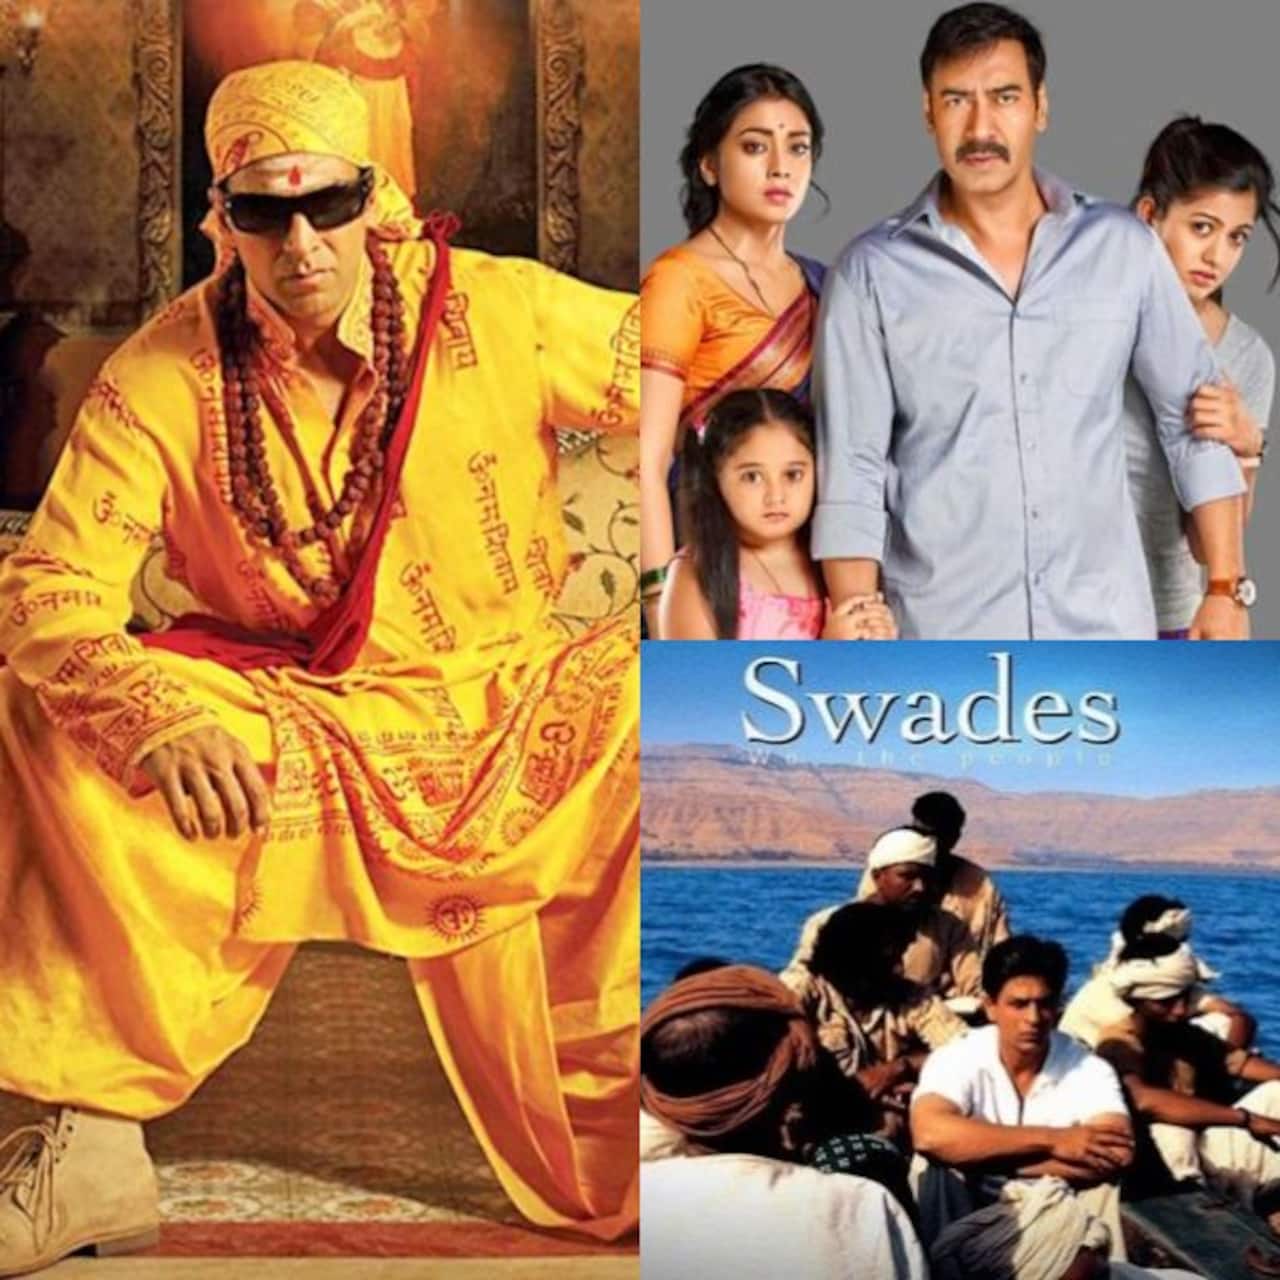 From Drishyam, Bhool Bhulaiyaa to Swadesh : 7 bollywood remakes of South films to watch today on Netflix, Amazon Prime Video & more